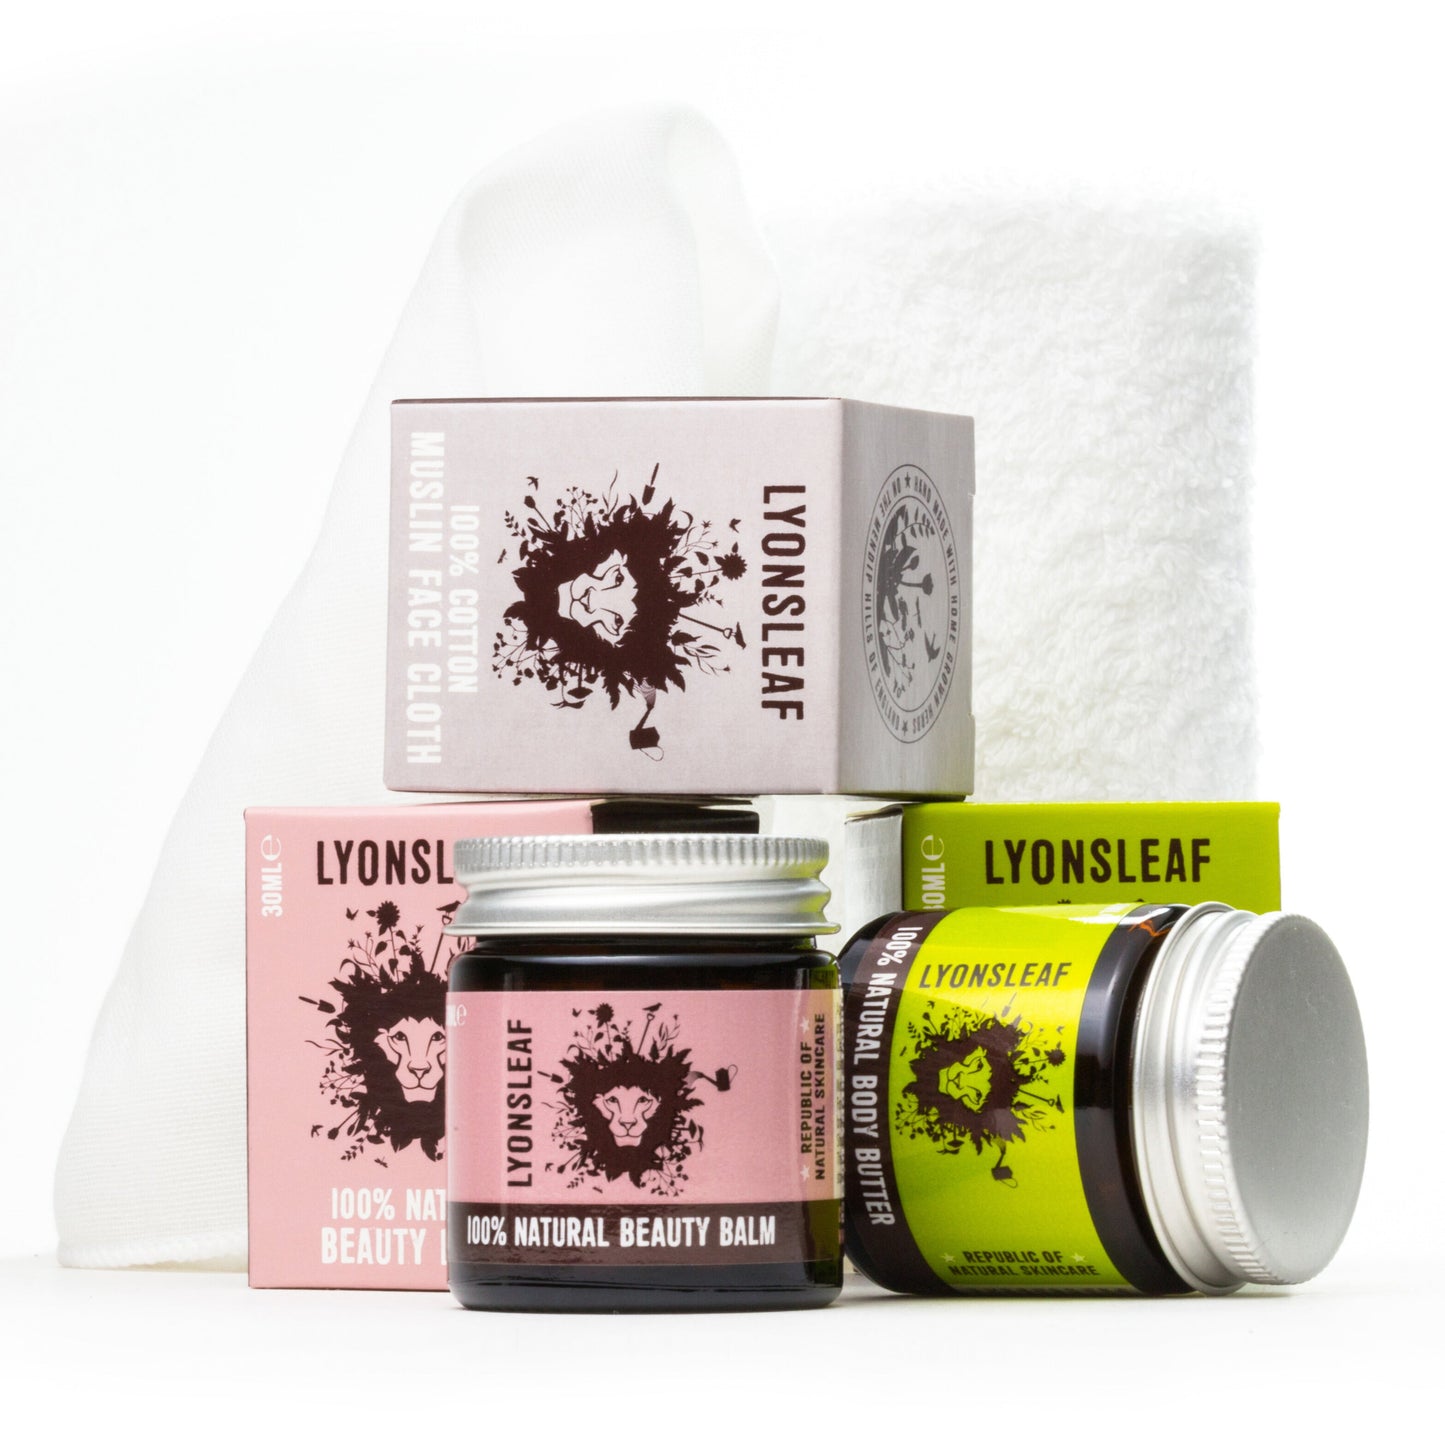 the contents of lyonsleaf's face and body natural skincare set. 100% natural beauty balm for hot cloth cleansing and moisturising, 100% cotton fluffy face cloth and body butter. the image shows the jars, boxes and cloth within the kit sitting at various angles